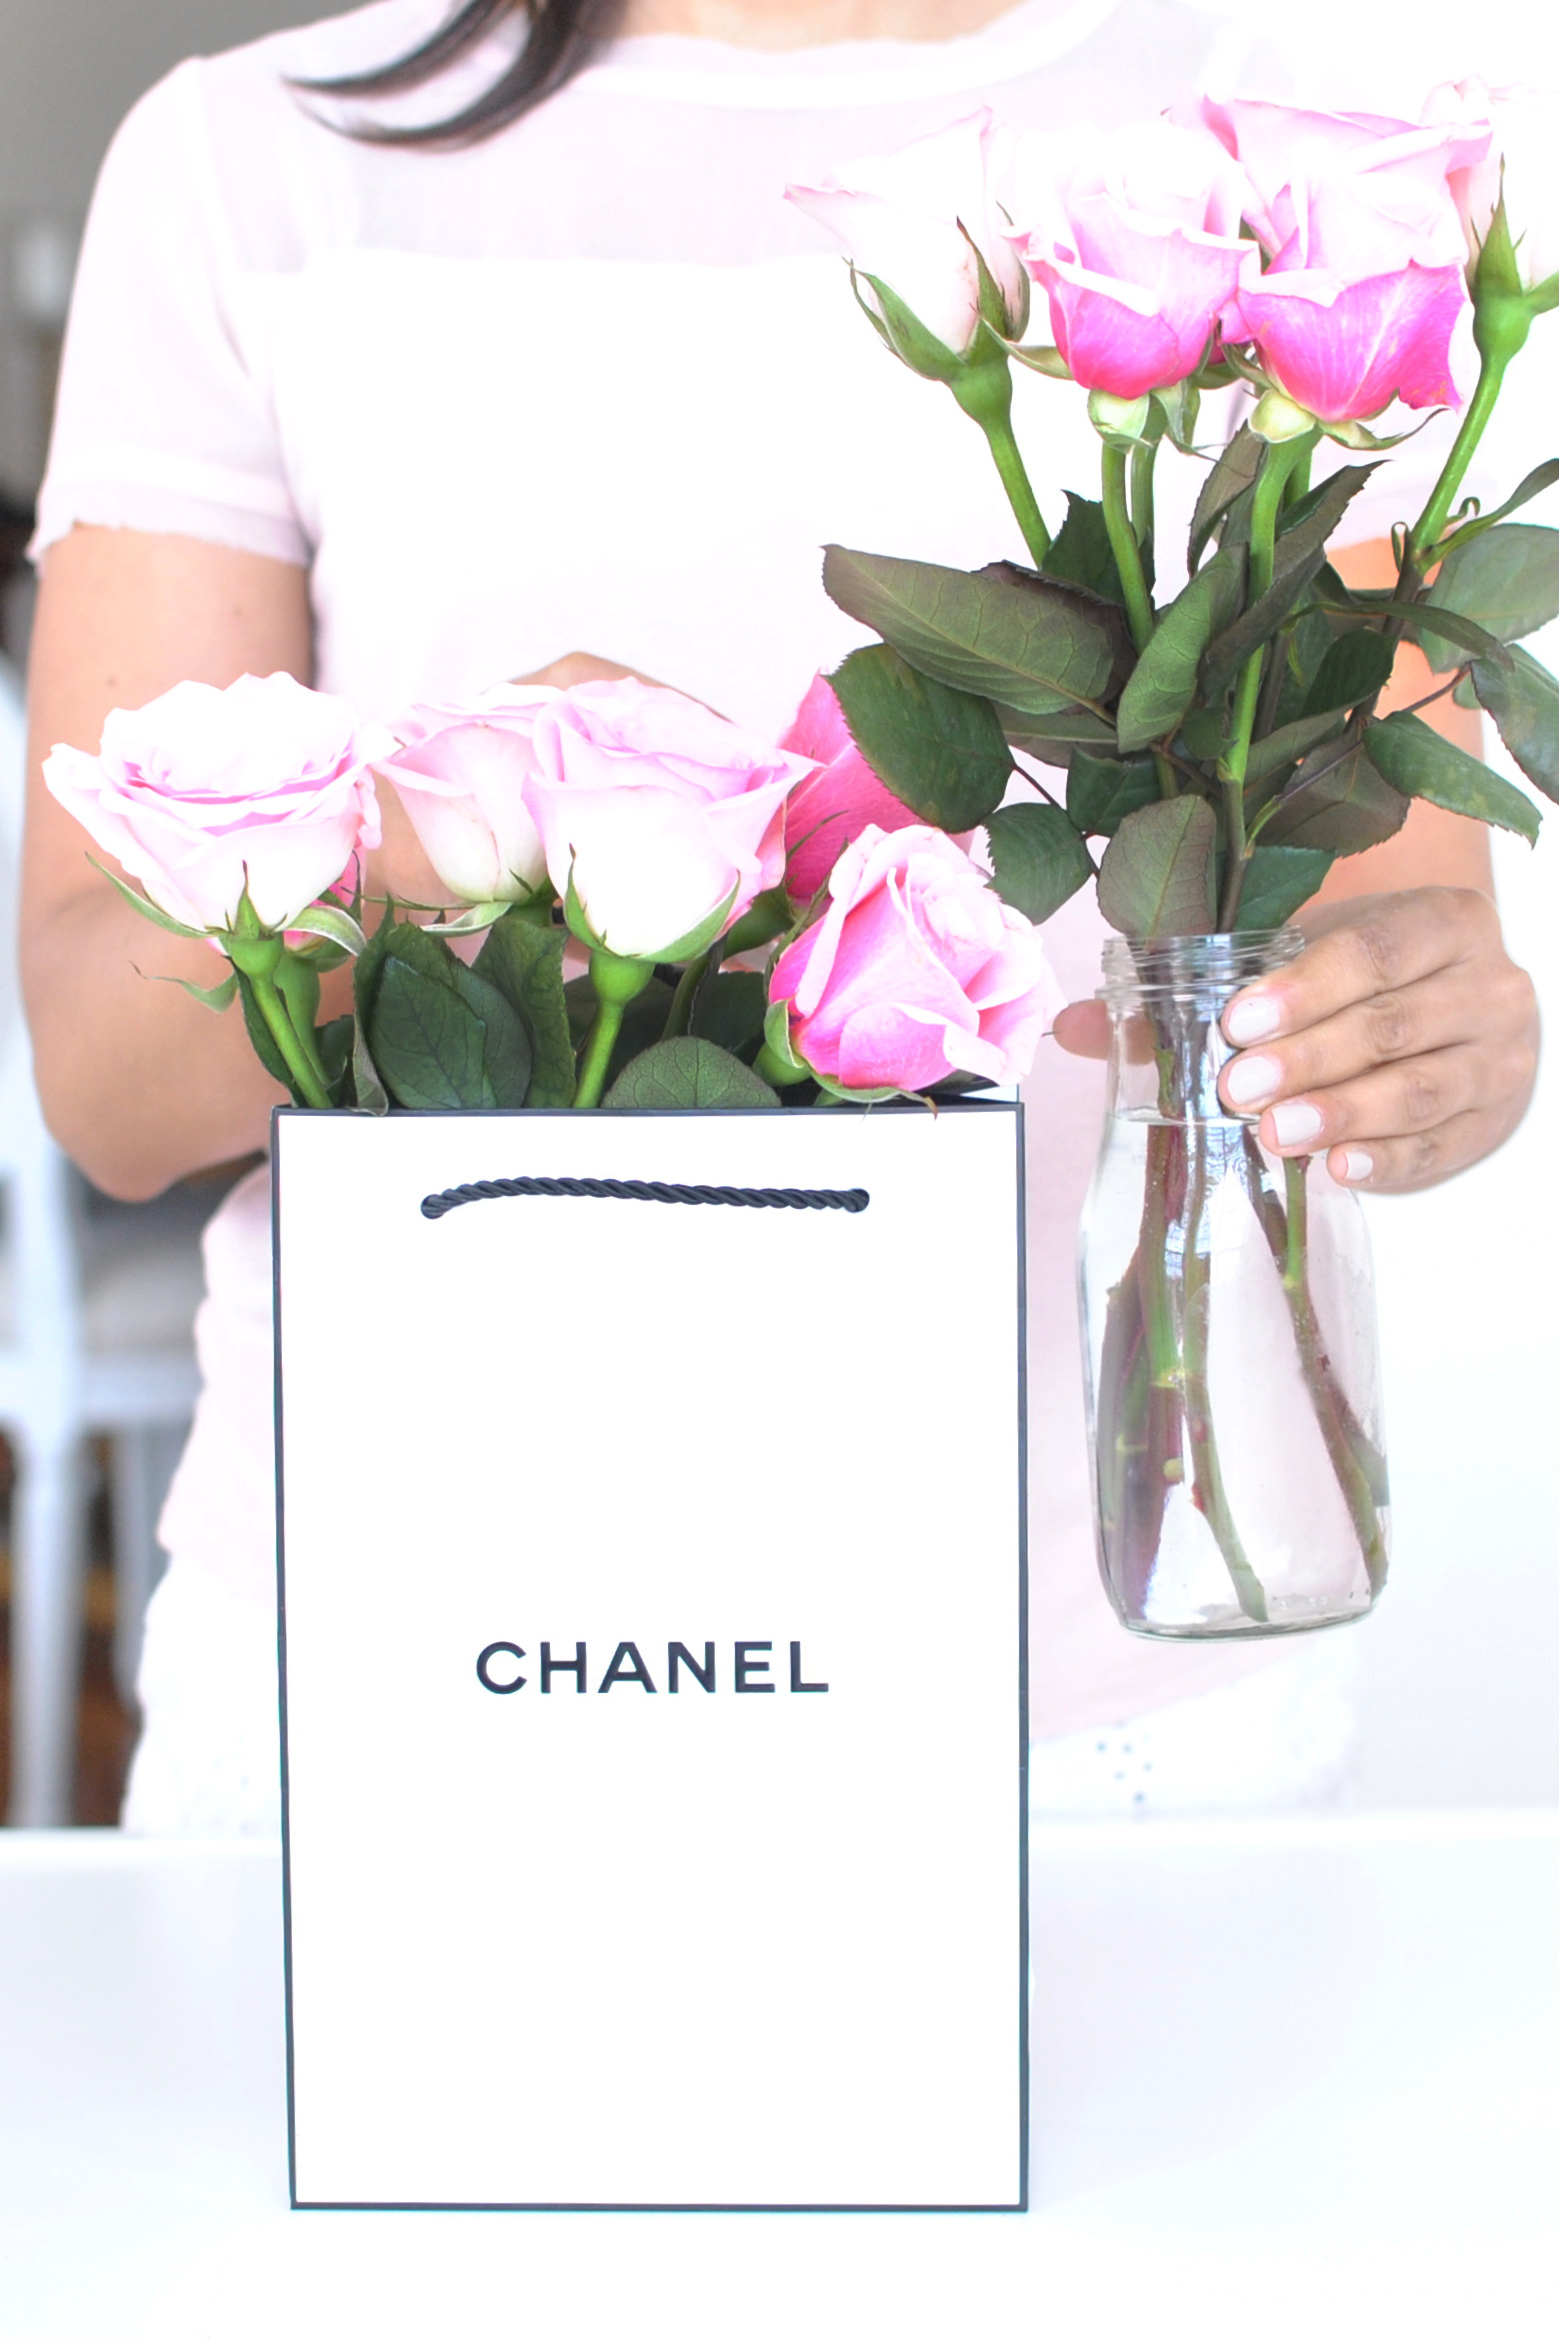 CHANEL - N°5, A LEGENDARY FRAGRANCE A timeless floral bouquet with a  sensual trail. Discover on chanel.com/-N5_HOLIDAY_2022_CHANEL